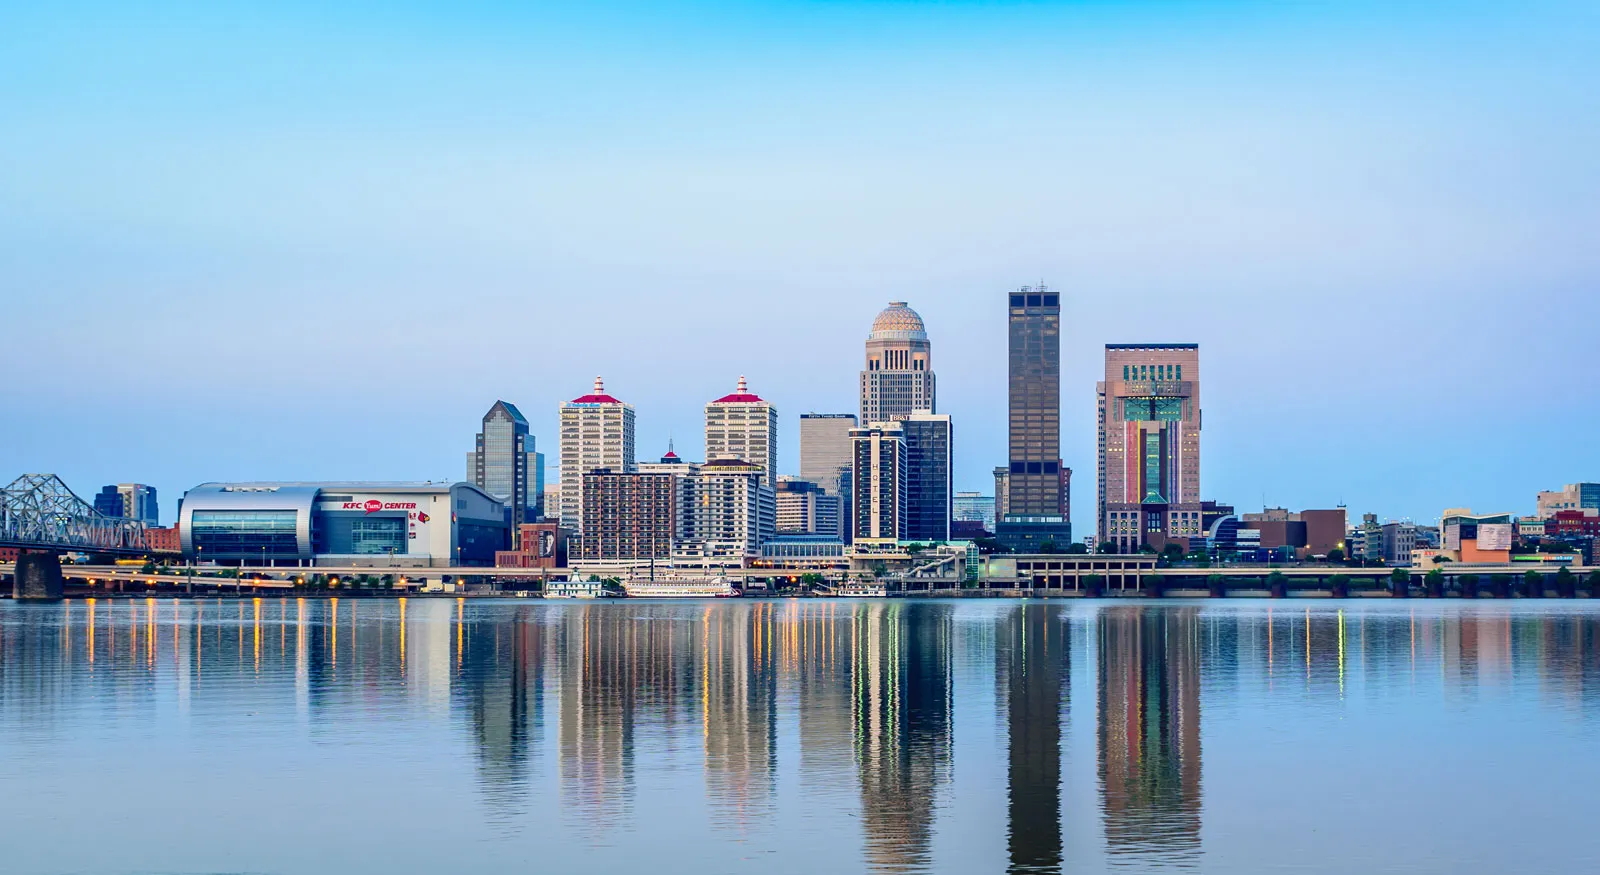 The Louisville, KY skyline. Louisville is home to some of the top addiction treatment centers in the U.S.